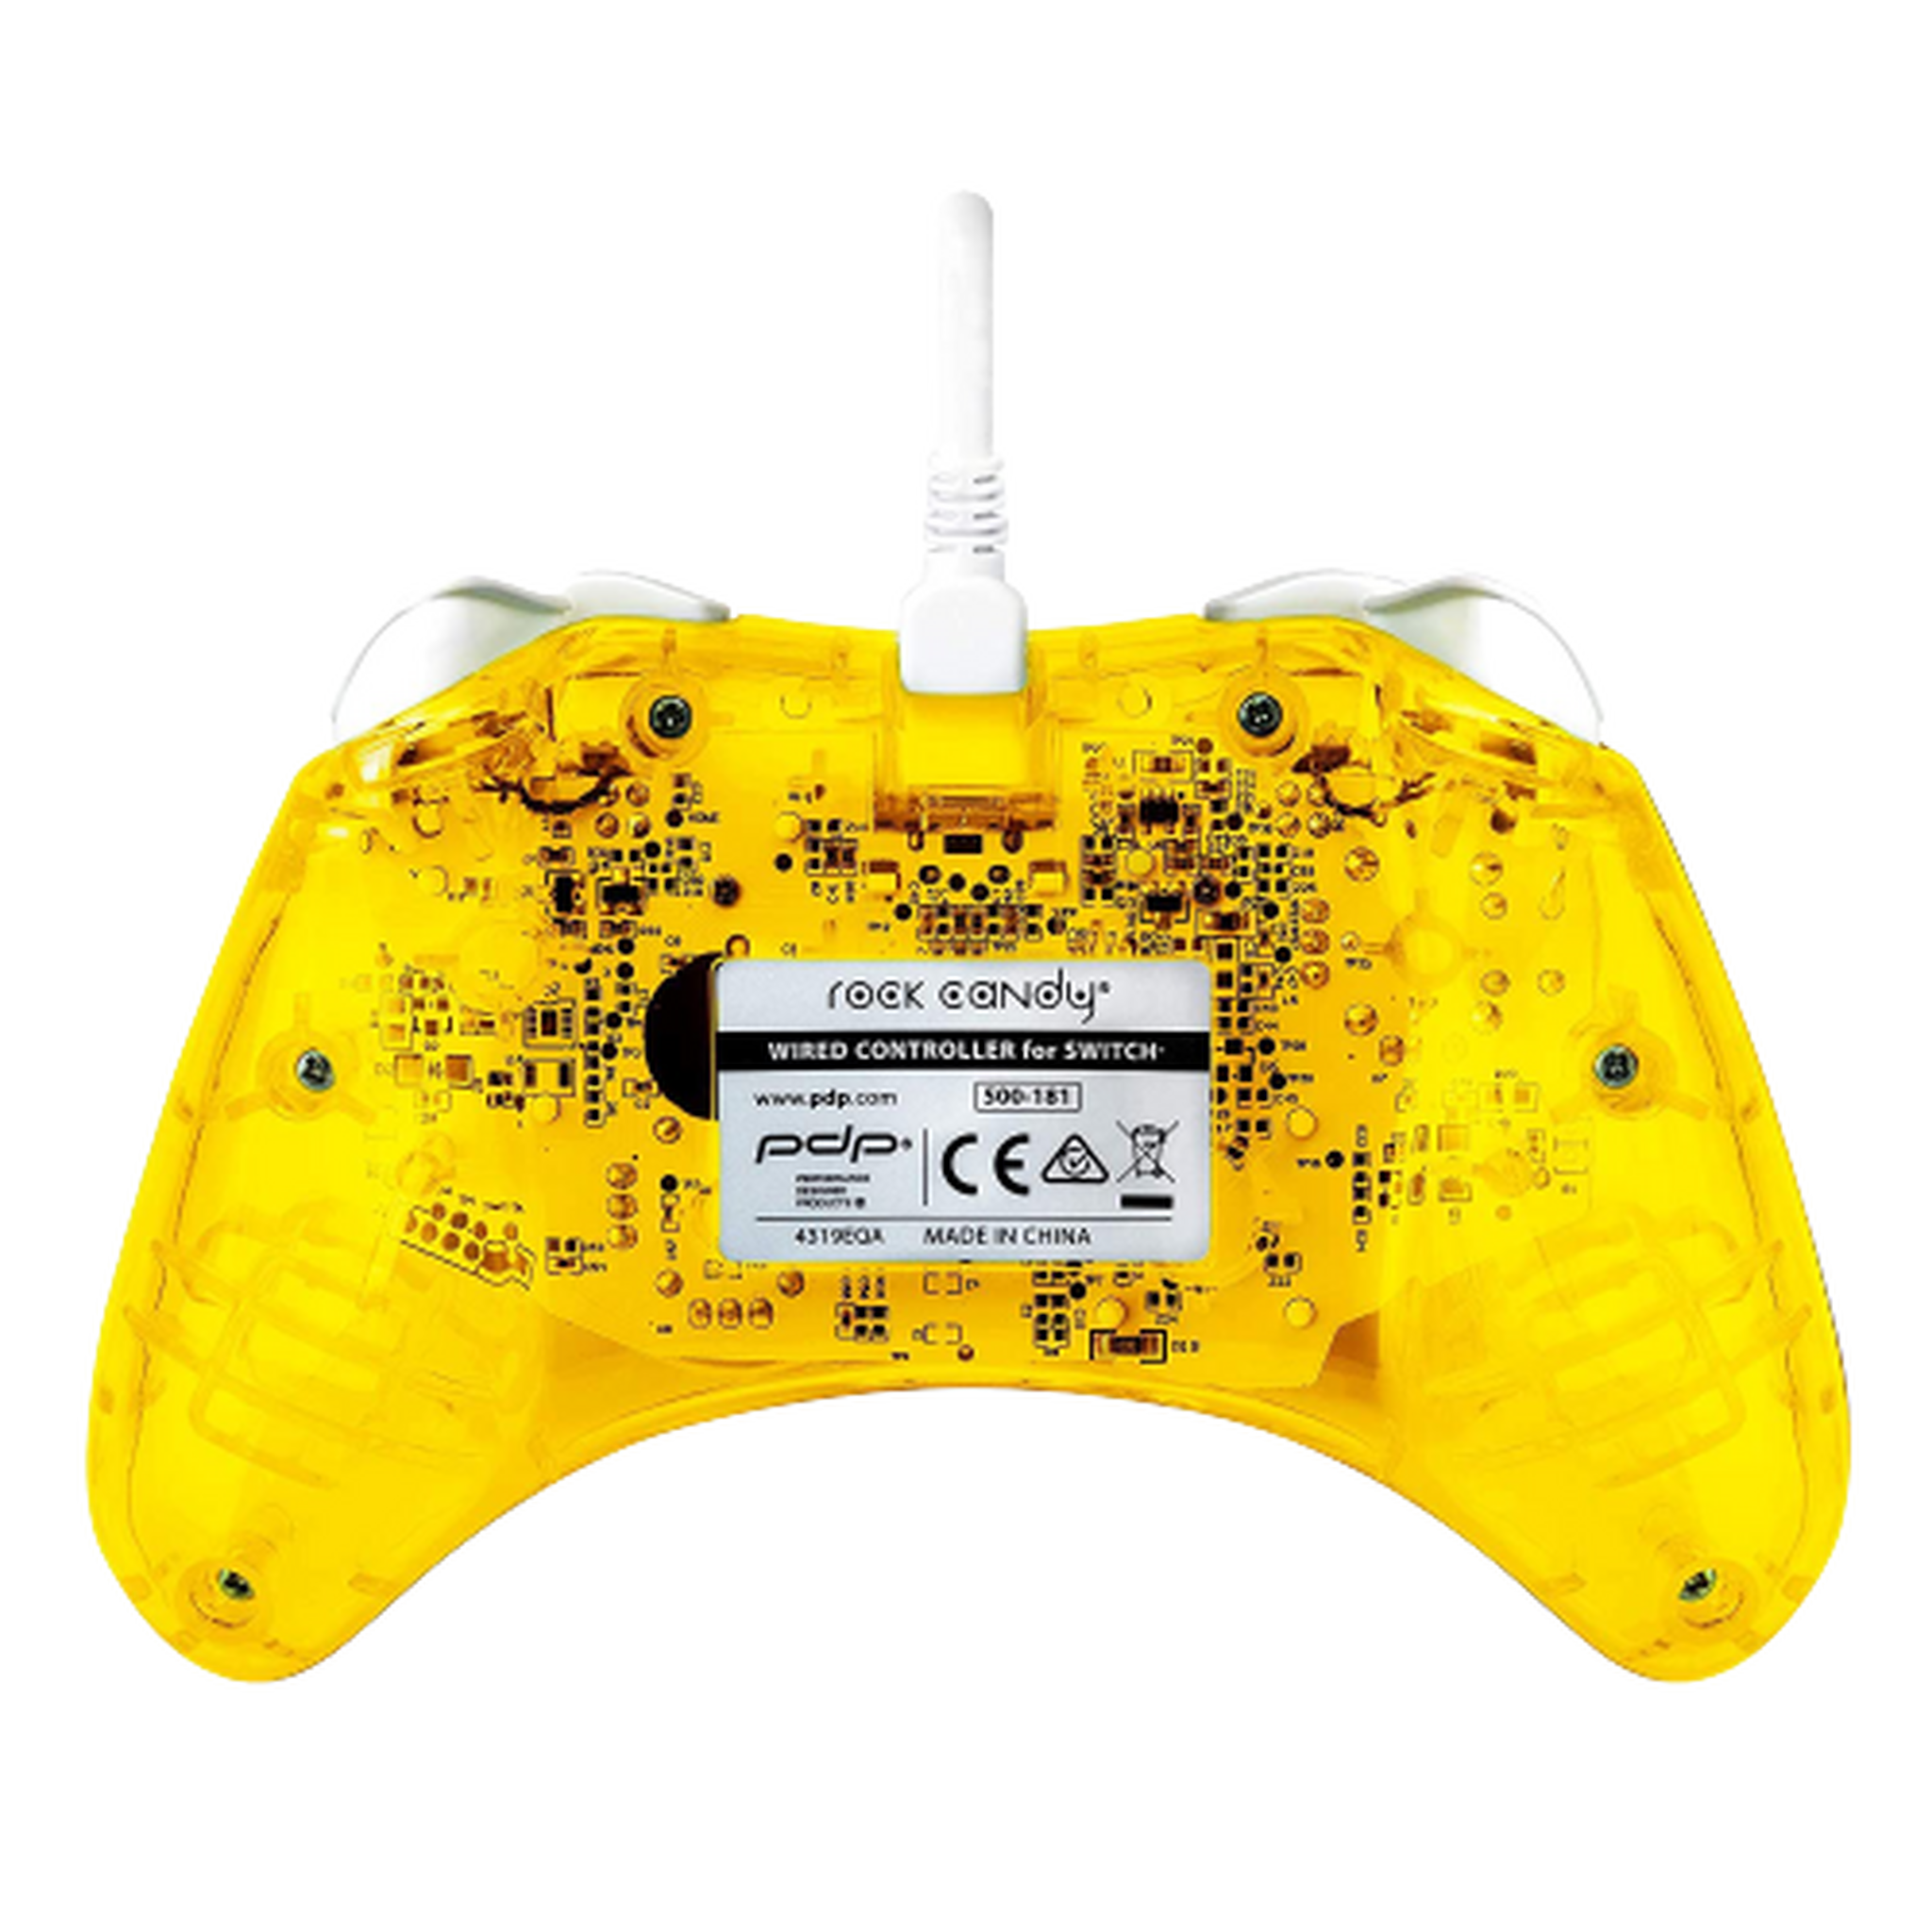 PDP Nintendo Switch Rock Candy Wired Controller - Pineapple